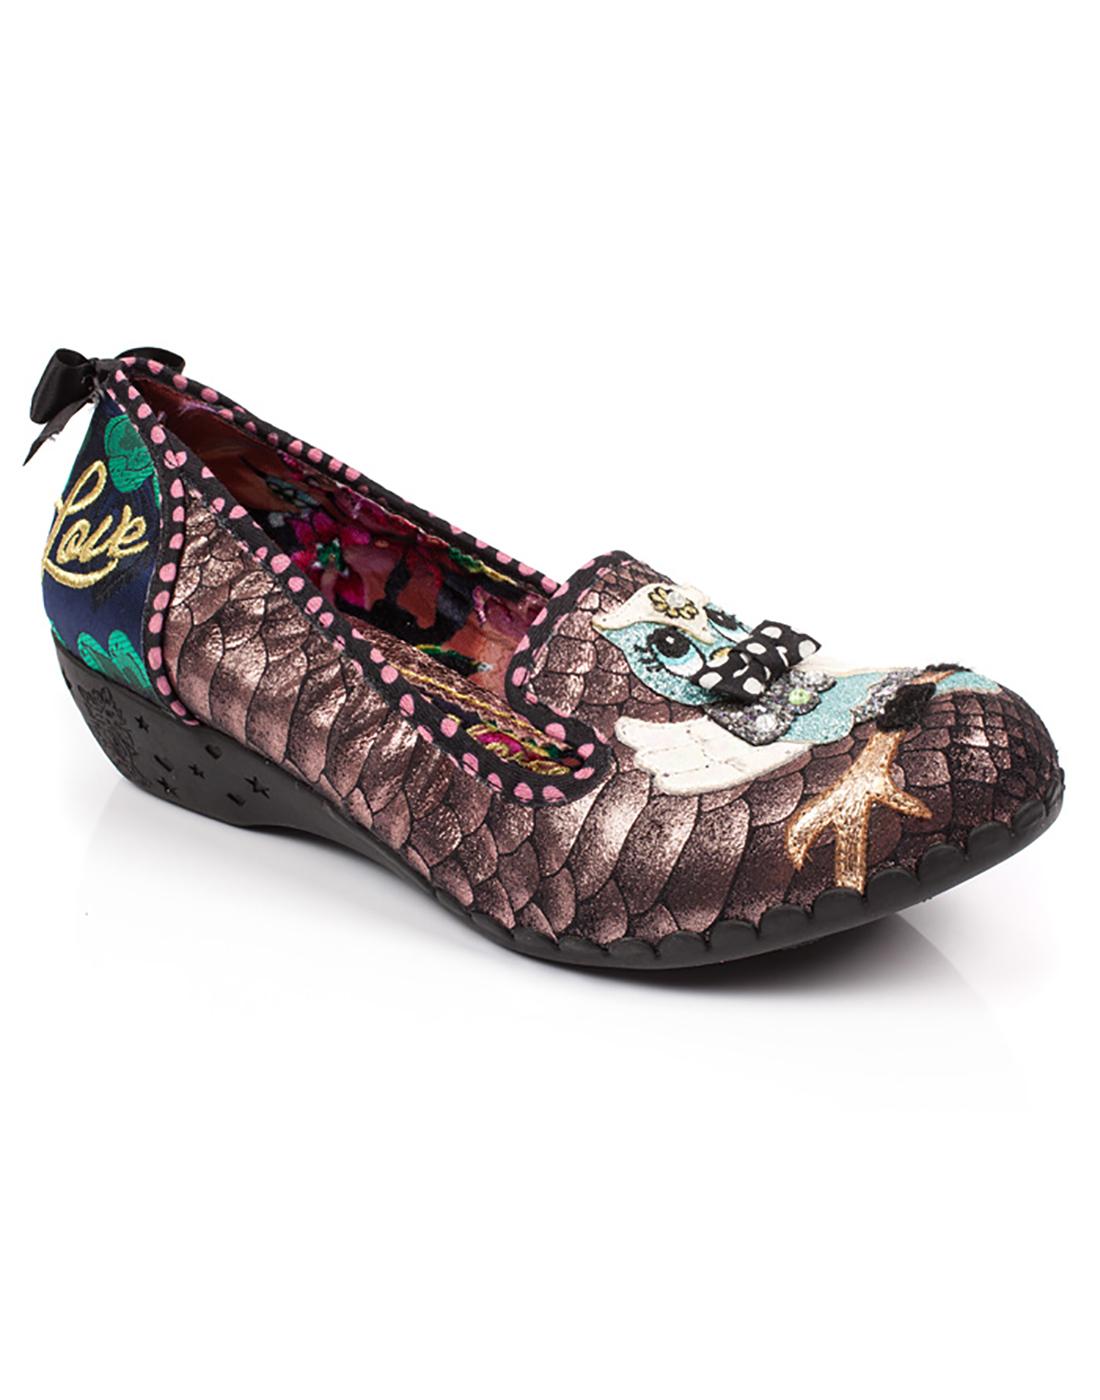 IRREGULAR CHOICE Hooting About Retro Owl Flexi Shoes in Gold